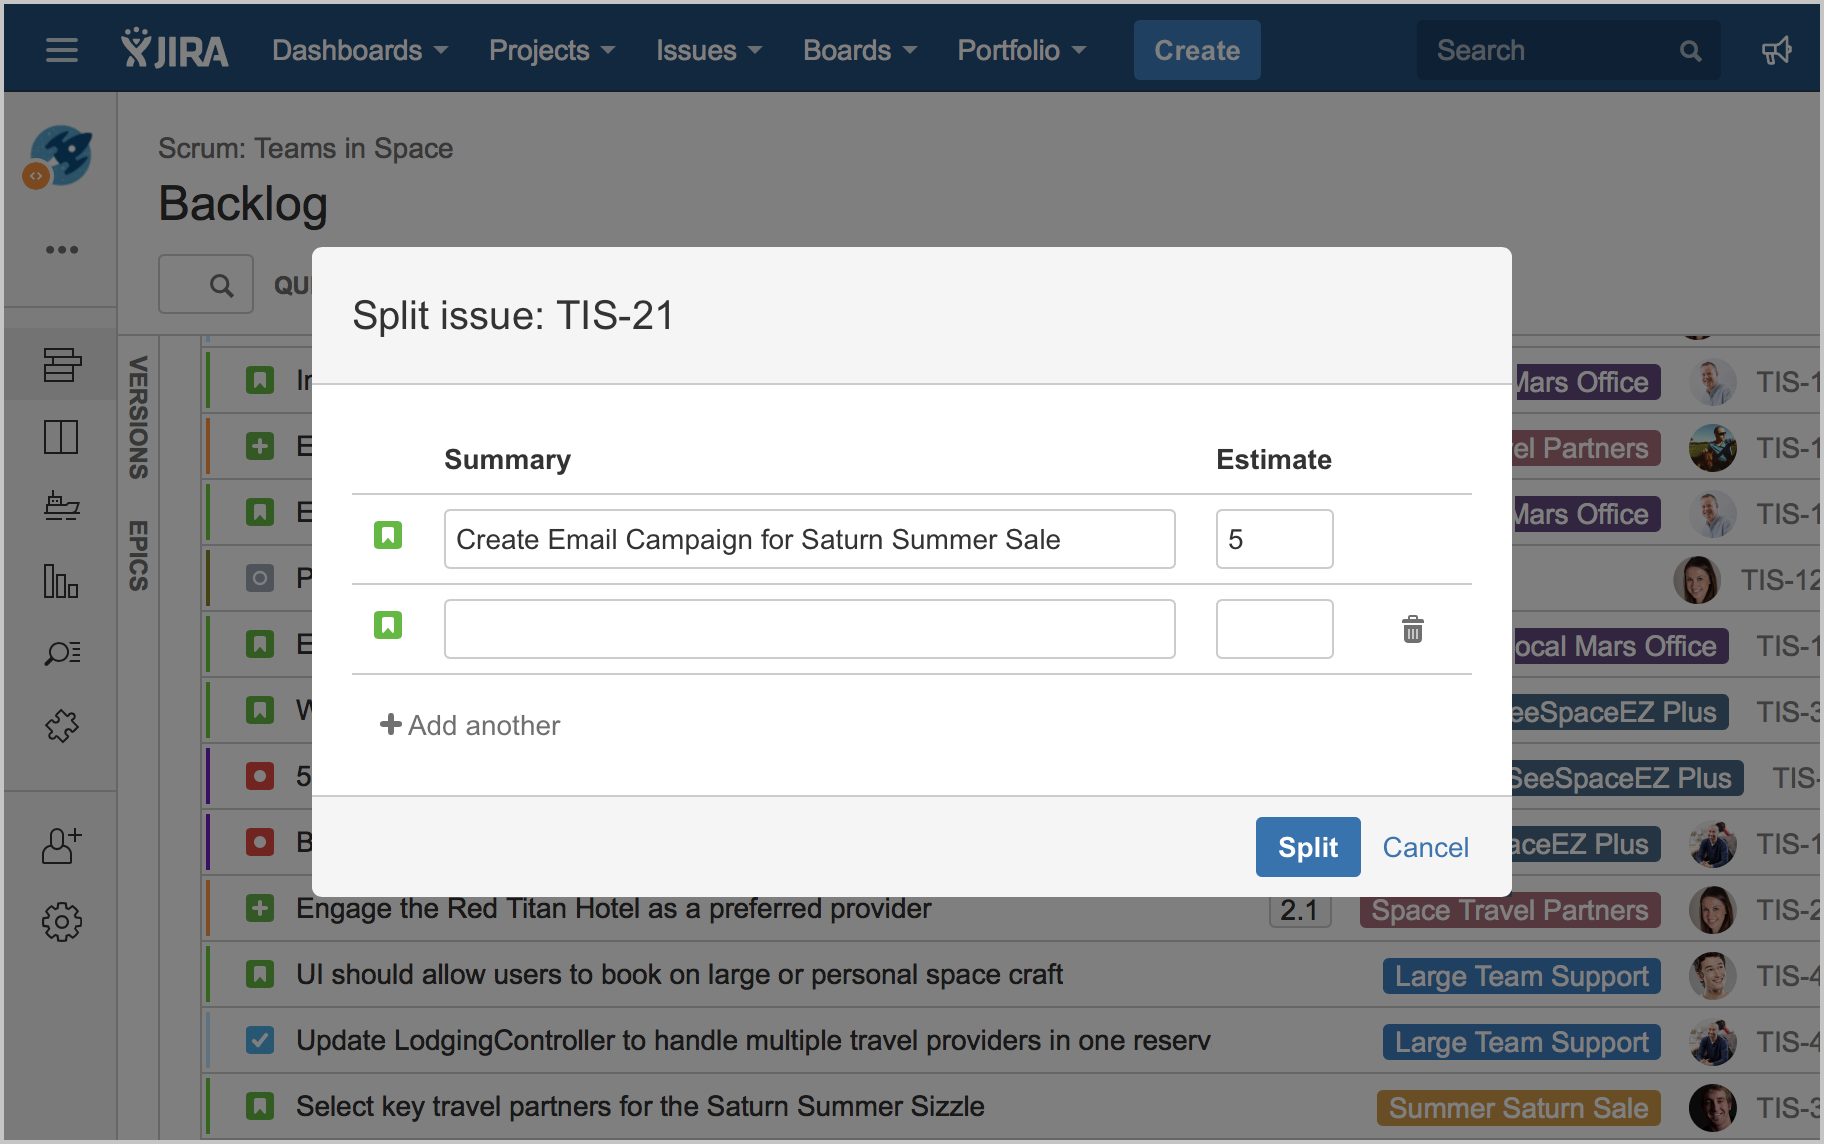 New features & releases in Jira Software | Atlassian